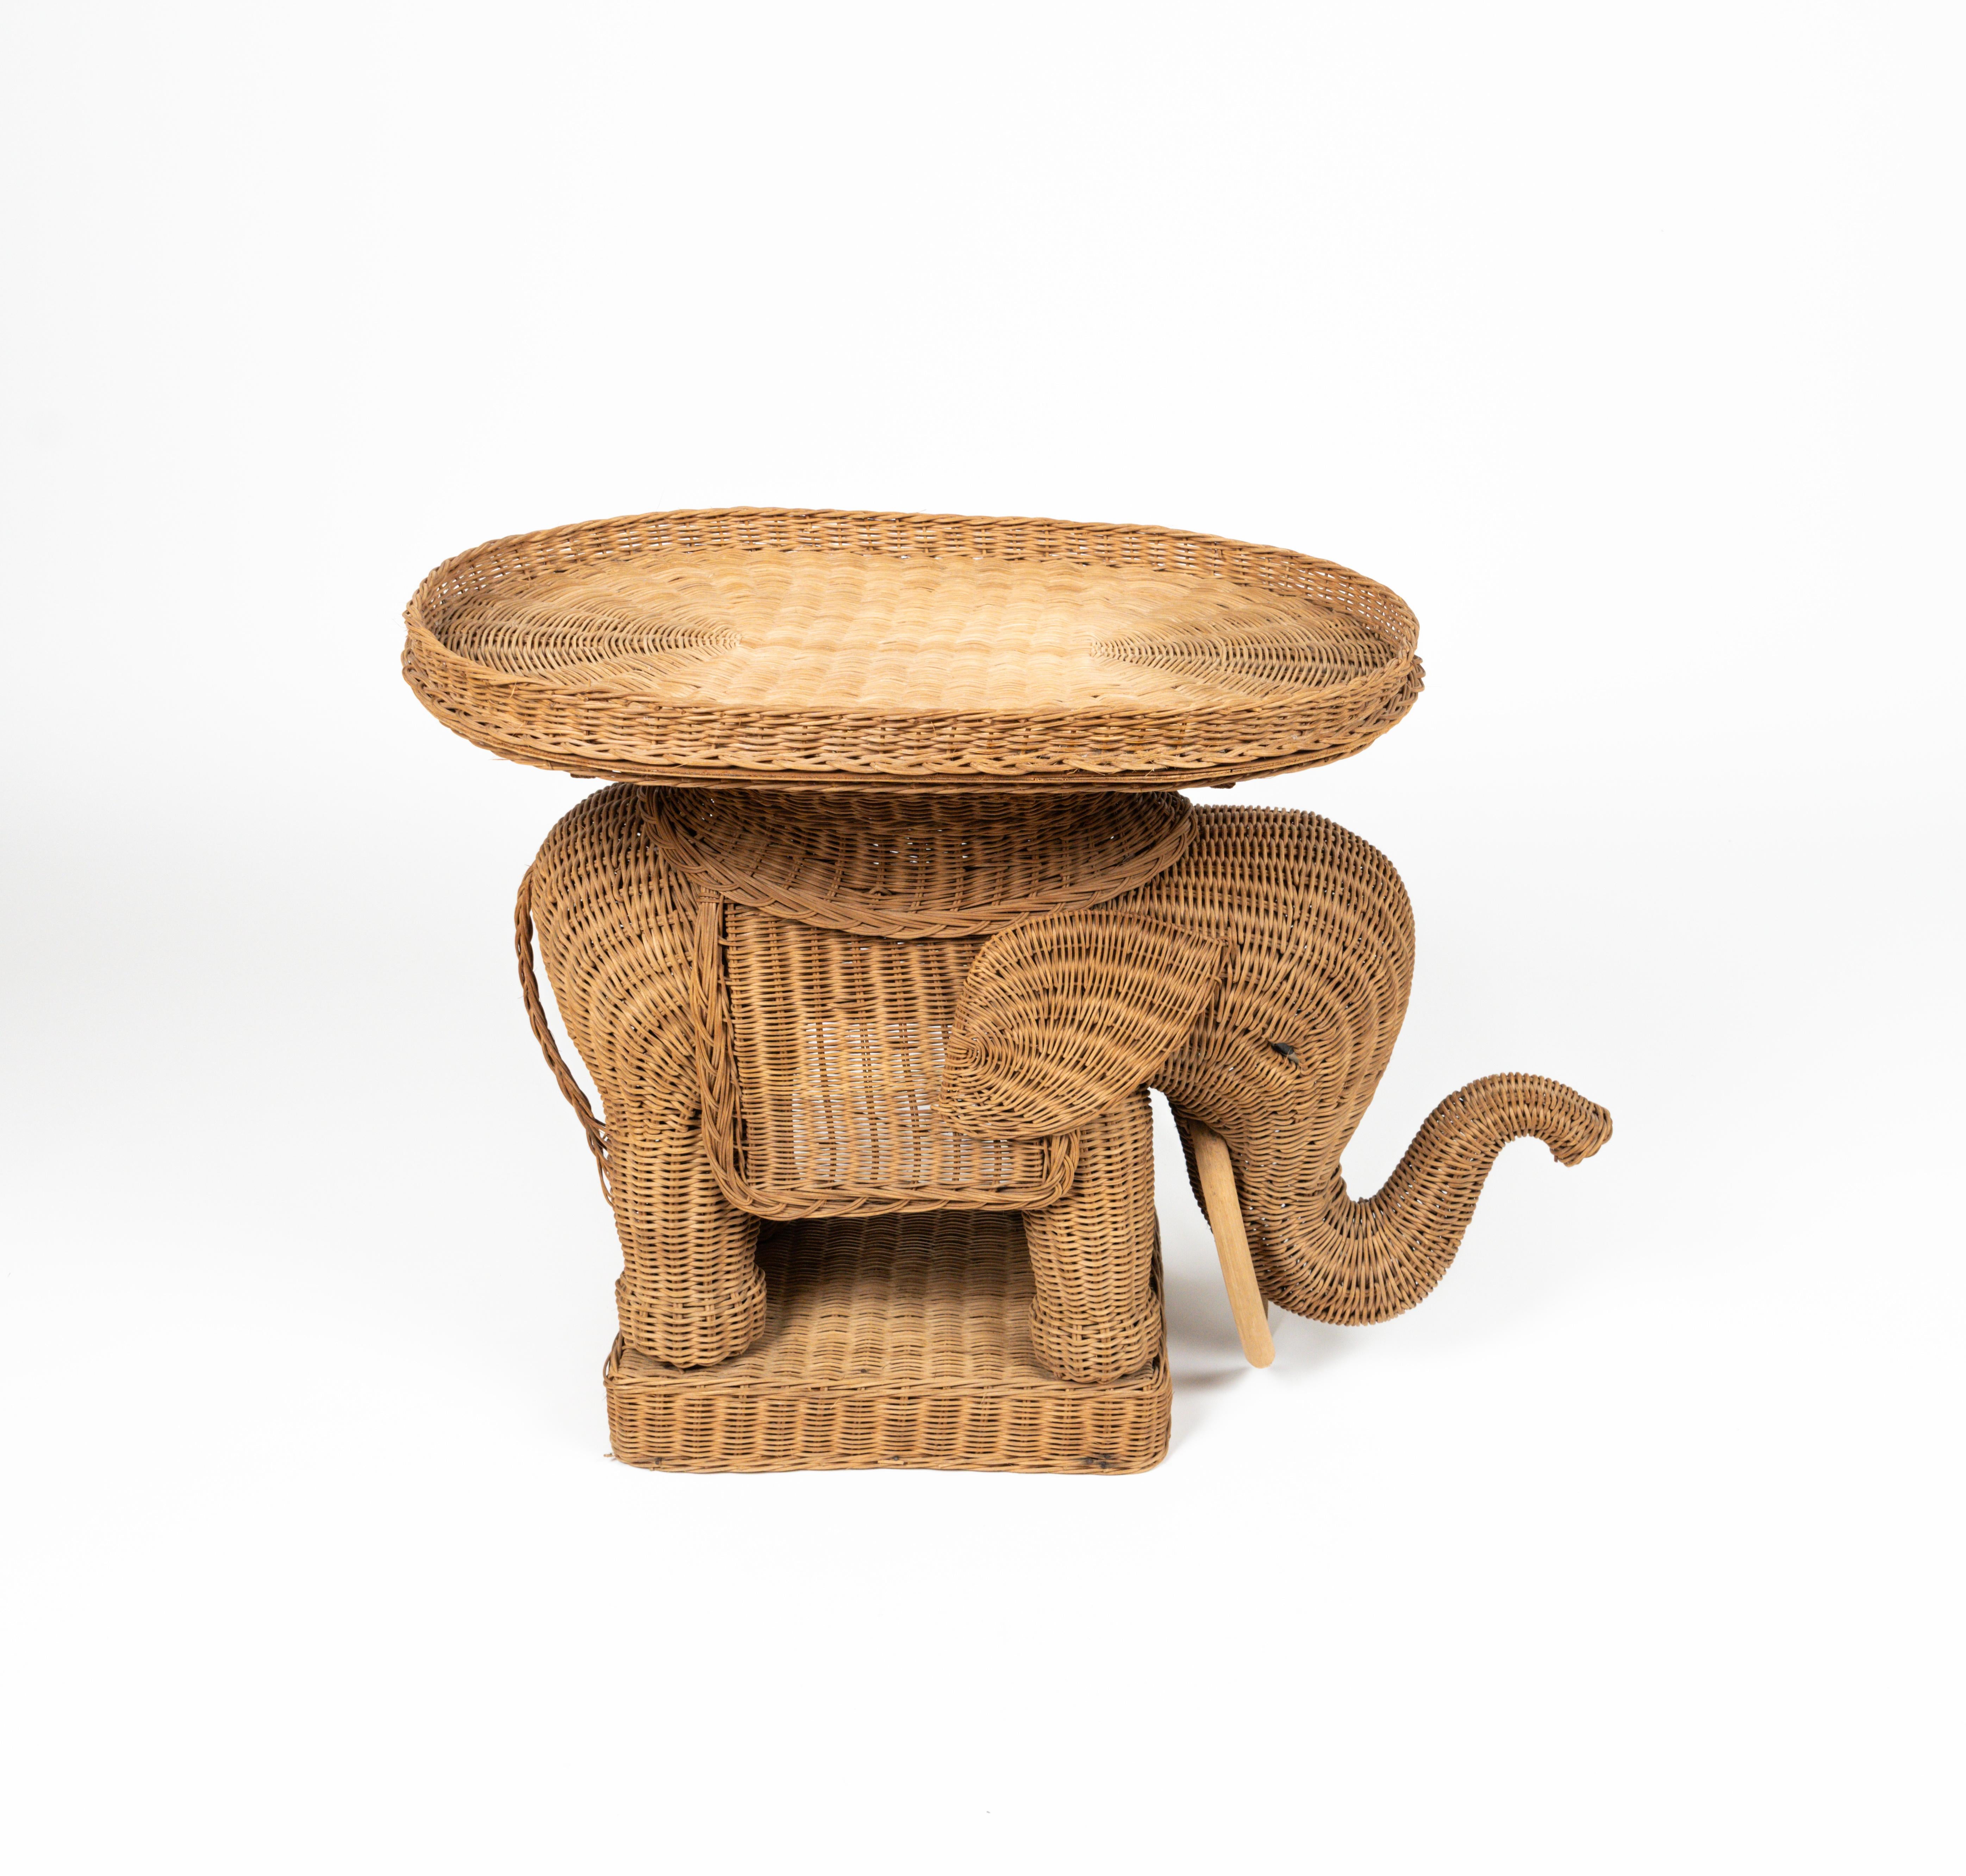 Rattan & Wicker Elephant Side Coffee Table Vivai Del Sud Style, Italy, 1960s For Sale 9